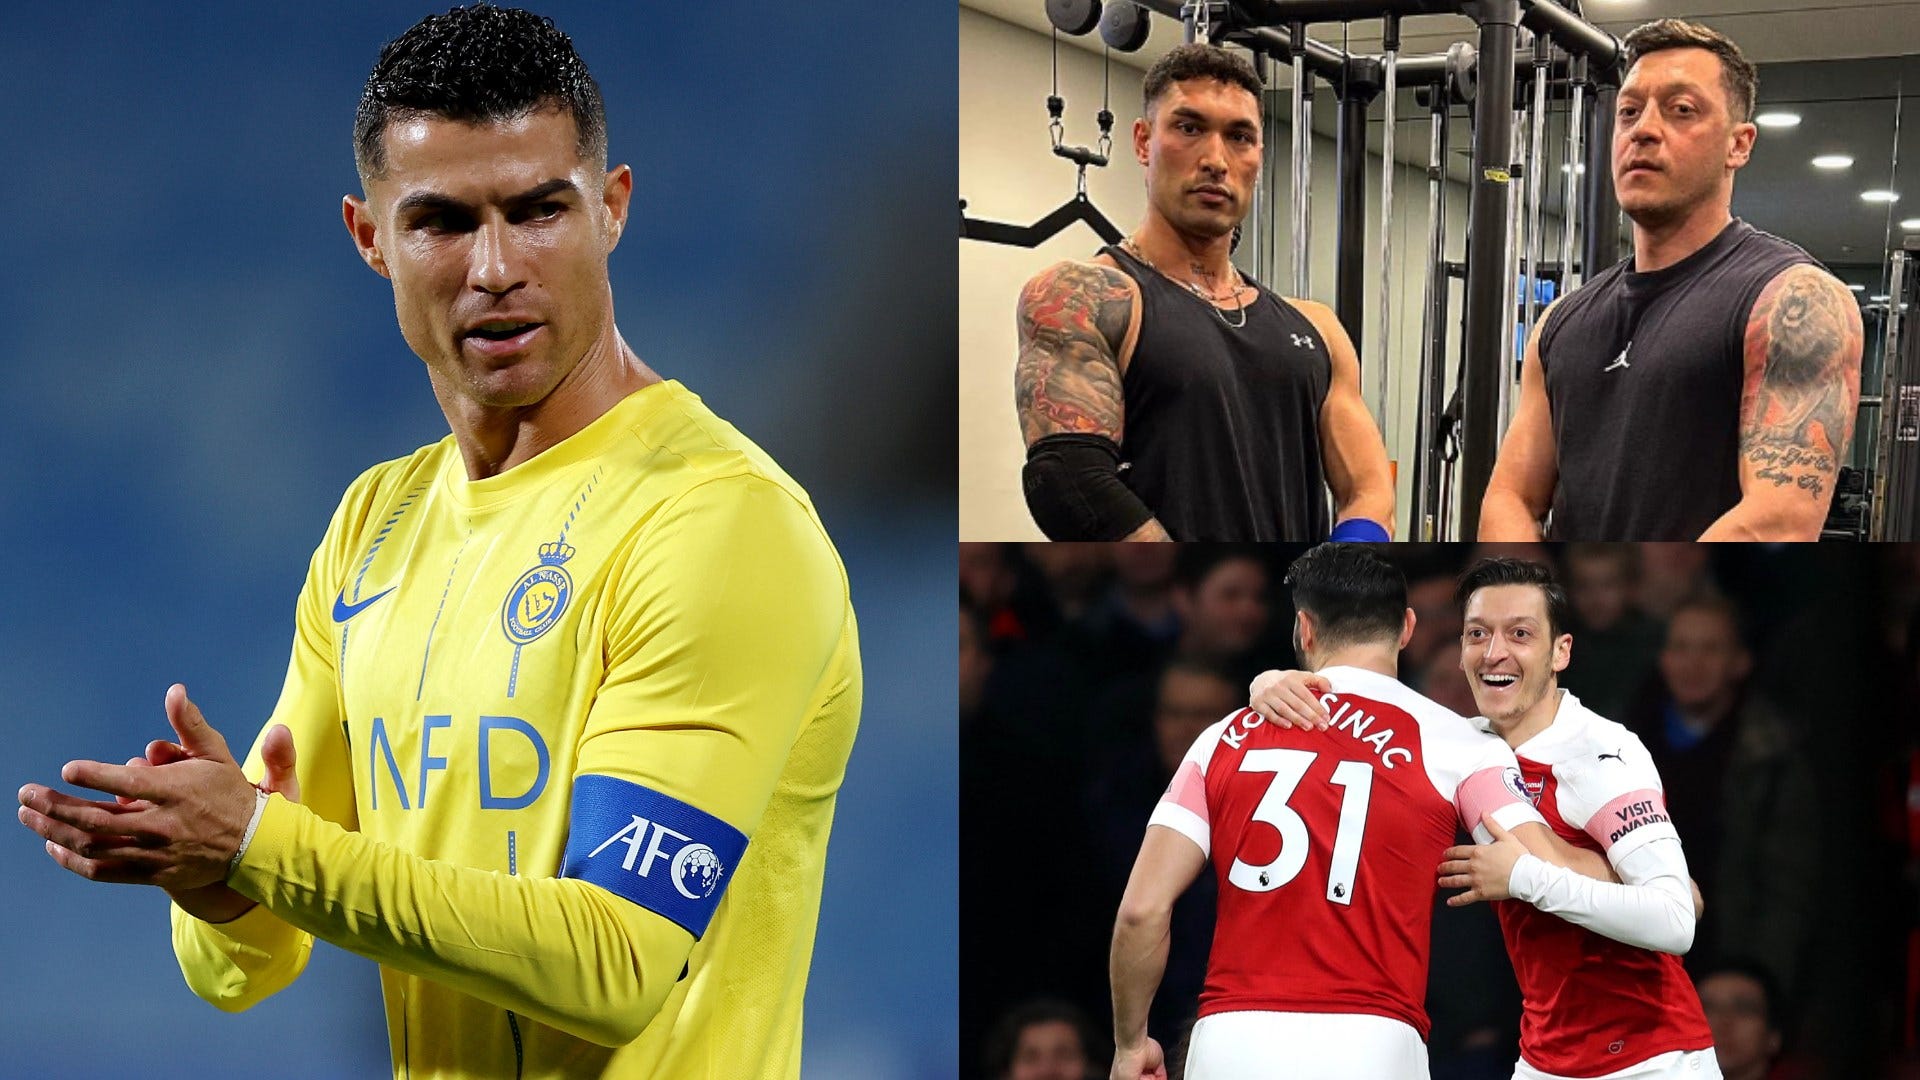 ‘Who hurt my bro?’ - Mesut Ozil stuns fans with crazy body transformation - which left Cristiano Ronaldo impressed - as ex-Arsenal star told he ‘doesn’t need Sead Kolasinac anymore’